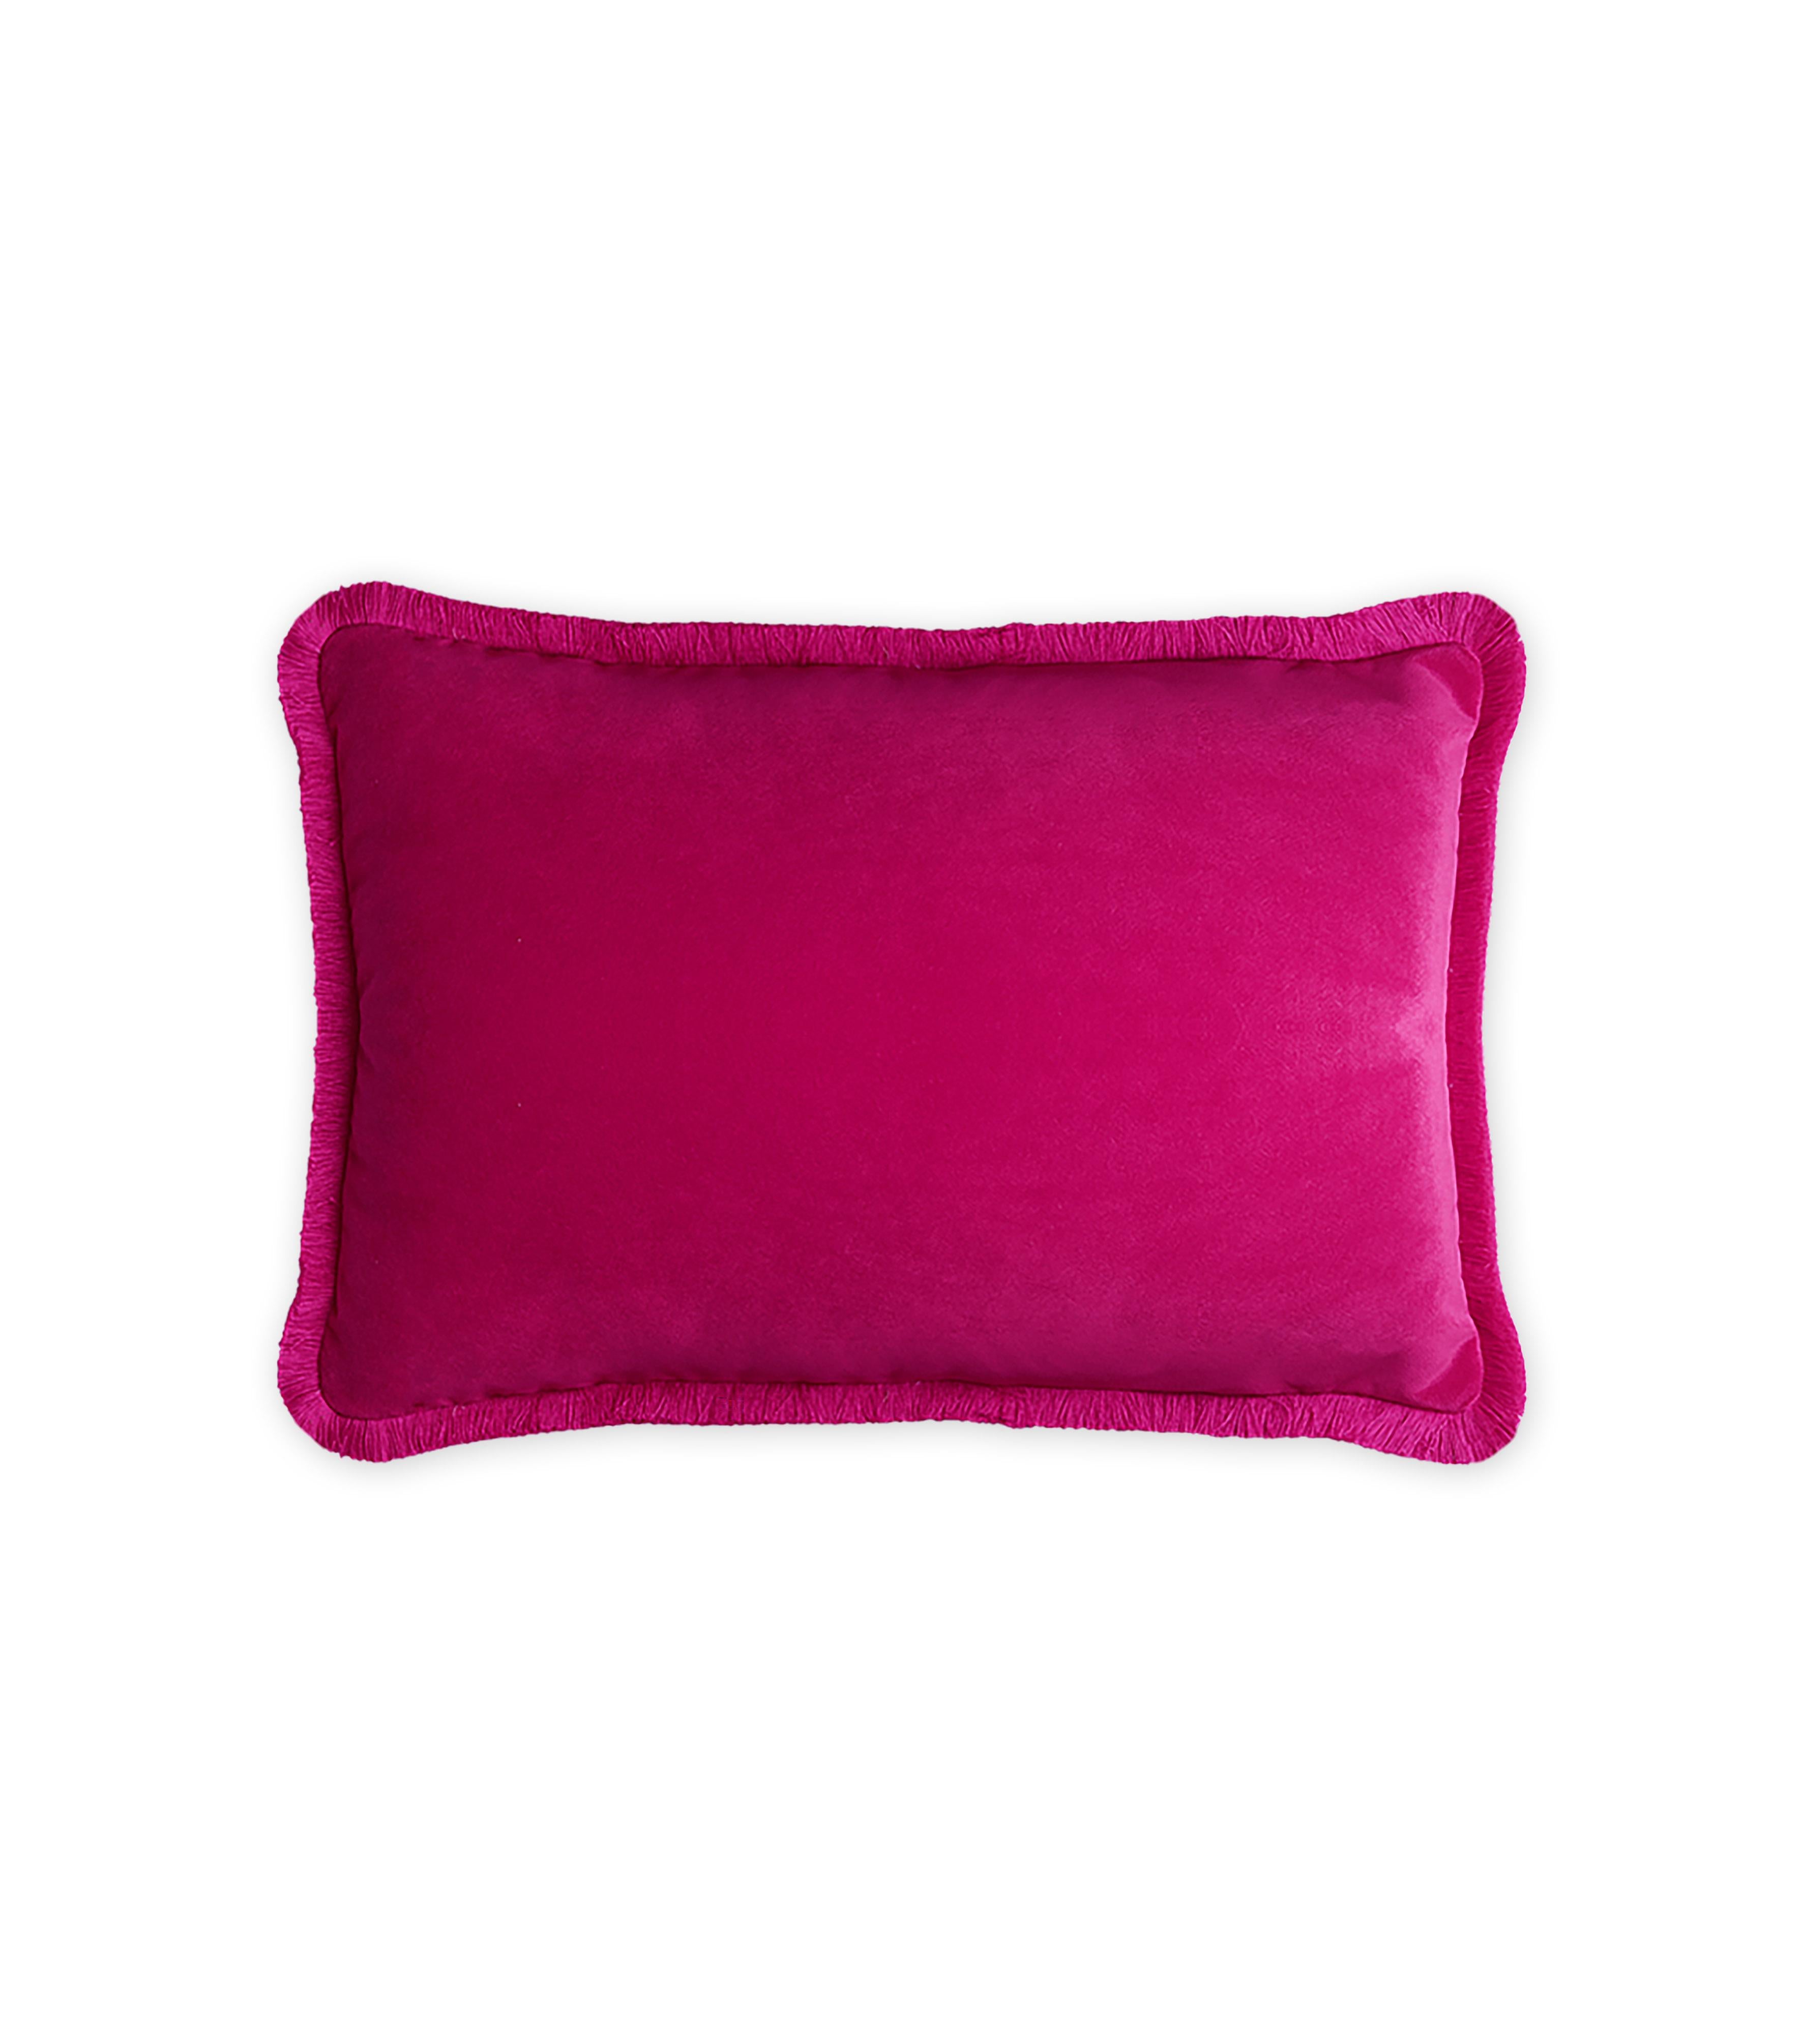 Hand-Crafted Happy Pillow Velvet Fuchsia with Fringes For Sale